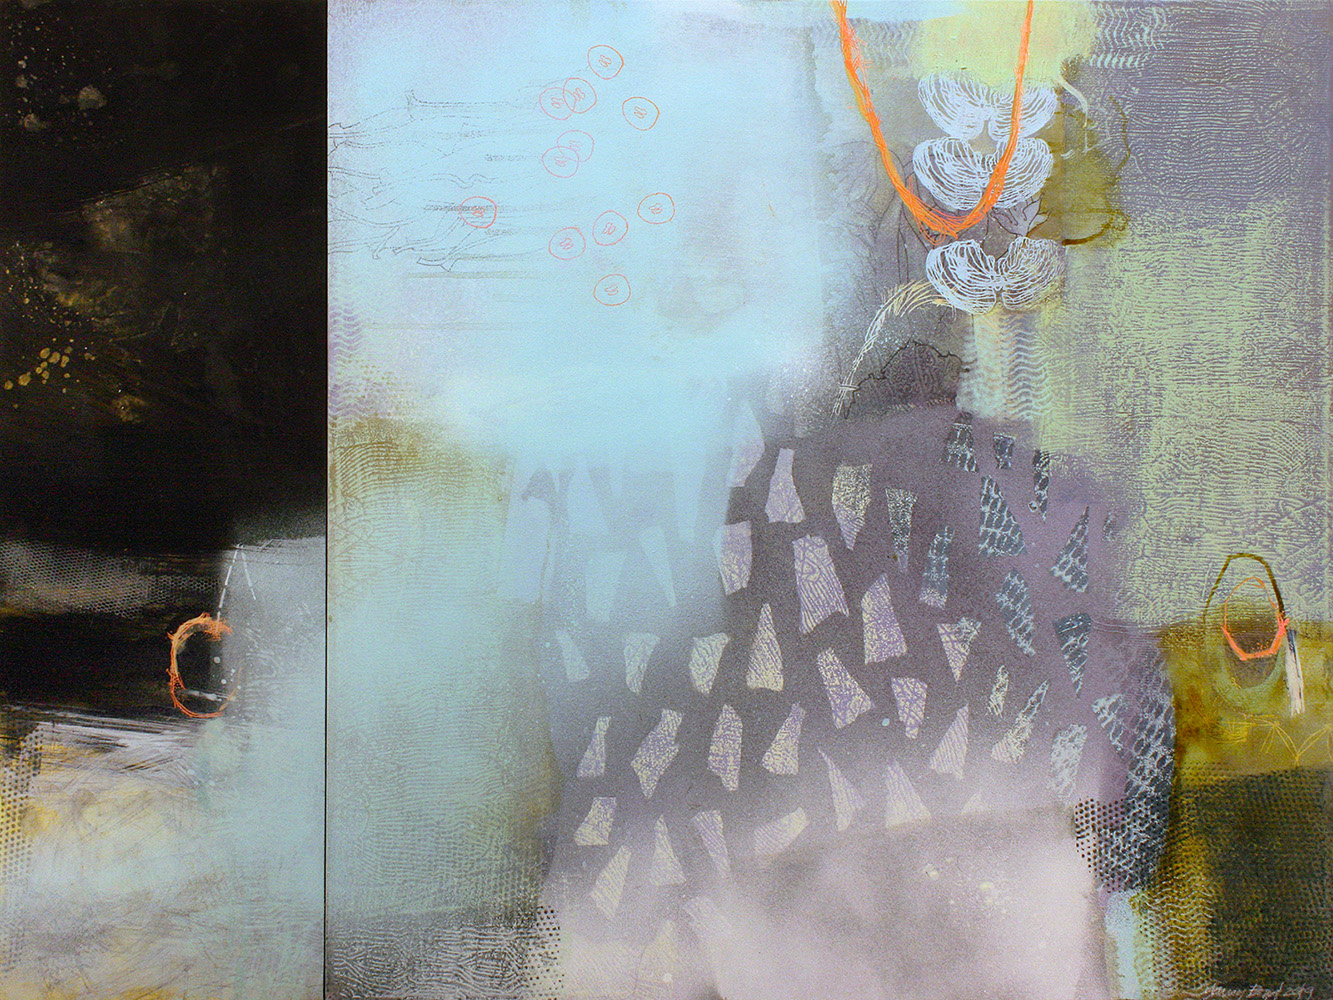 abstraction, change, influence, Egypt, metaphor, botanical, ethereal, diptych